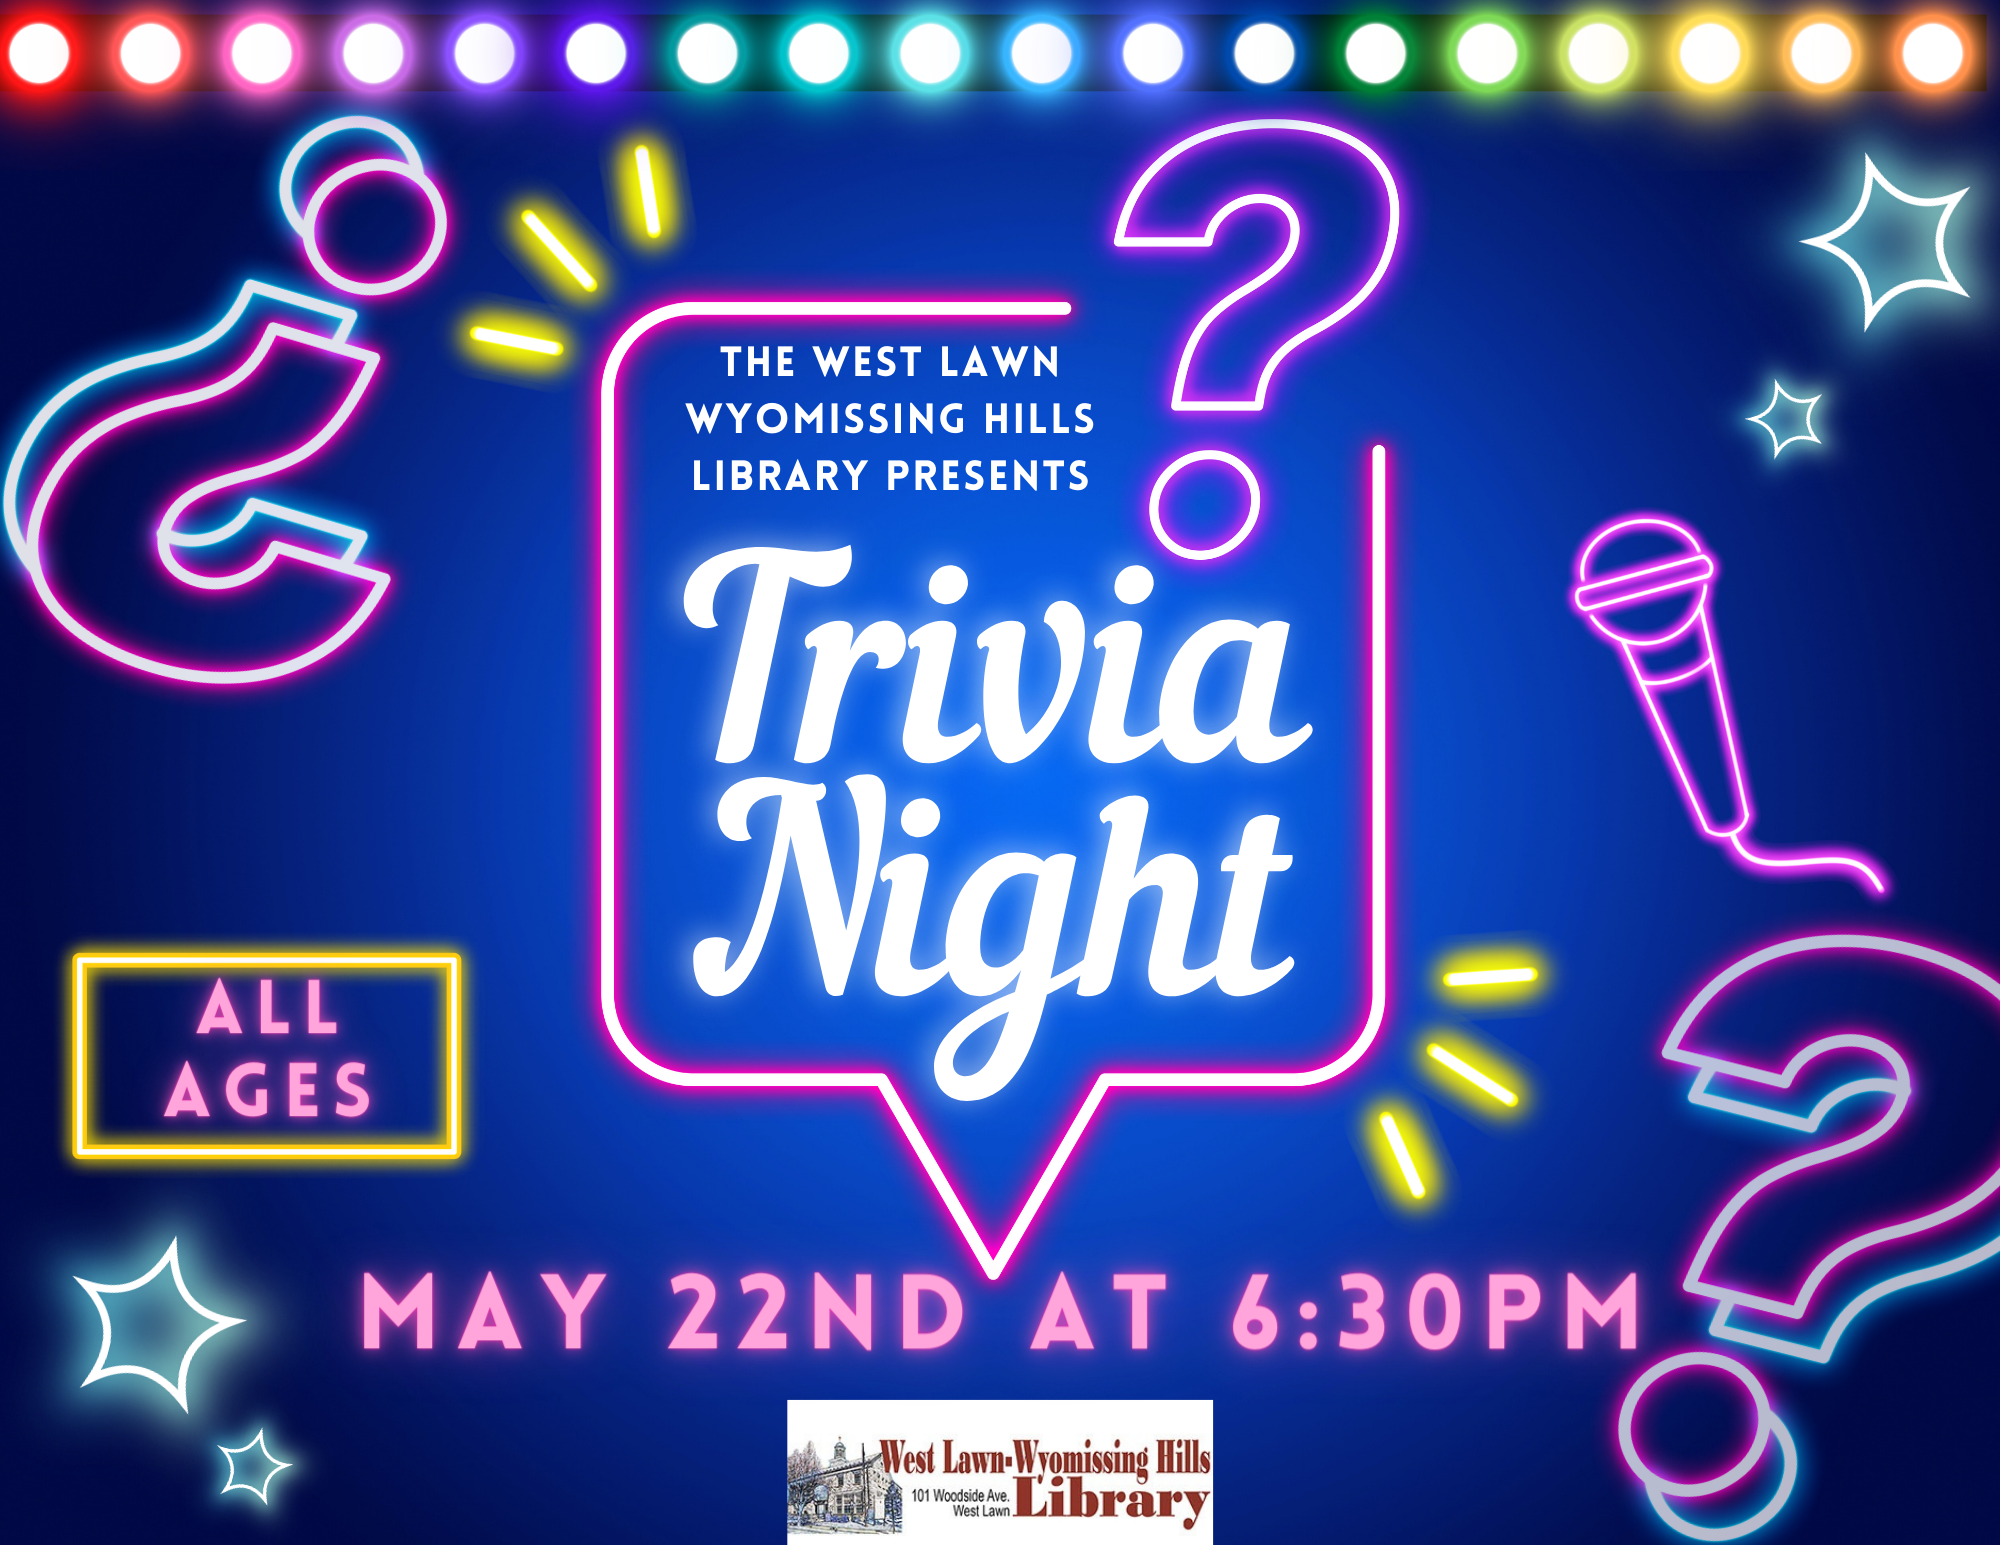 Wednesday, May 22nd at 6:30PM   Join us for a night of Family Friendly trivia! All Ages are welcome!  No registration required! Free!  The winning team will receive a small prize from the library!